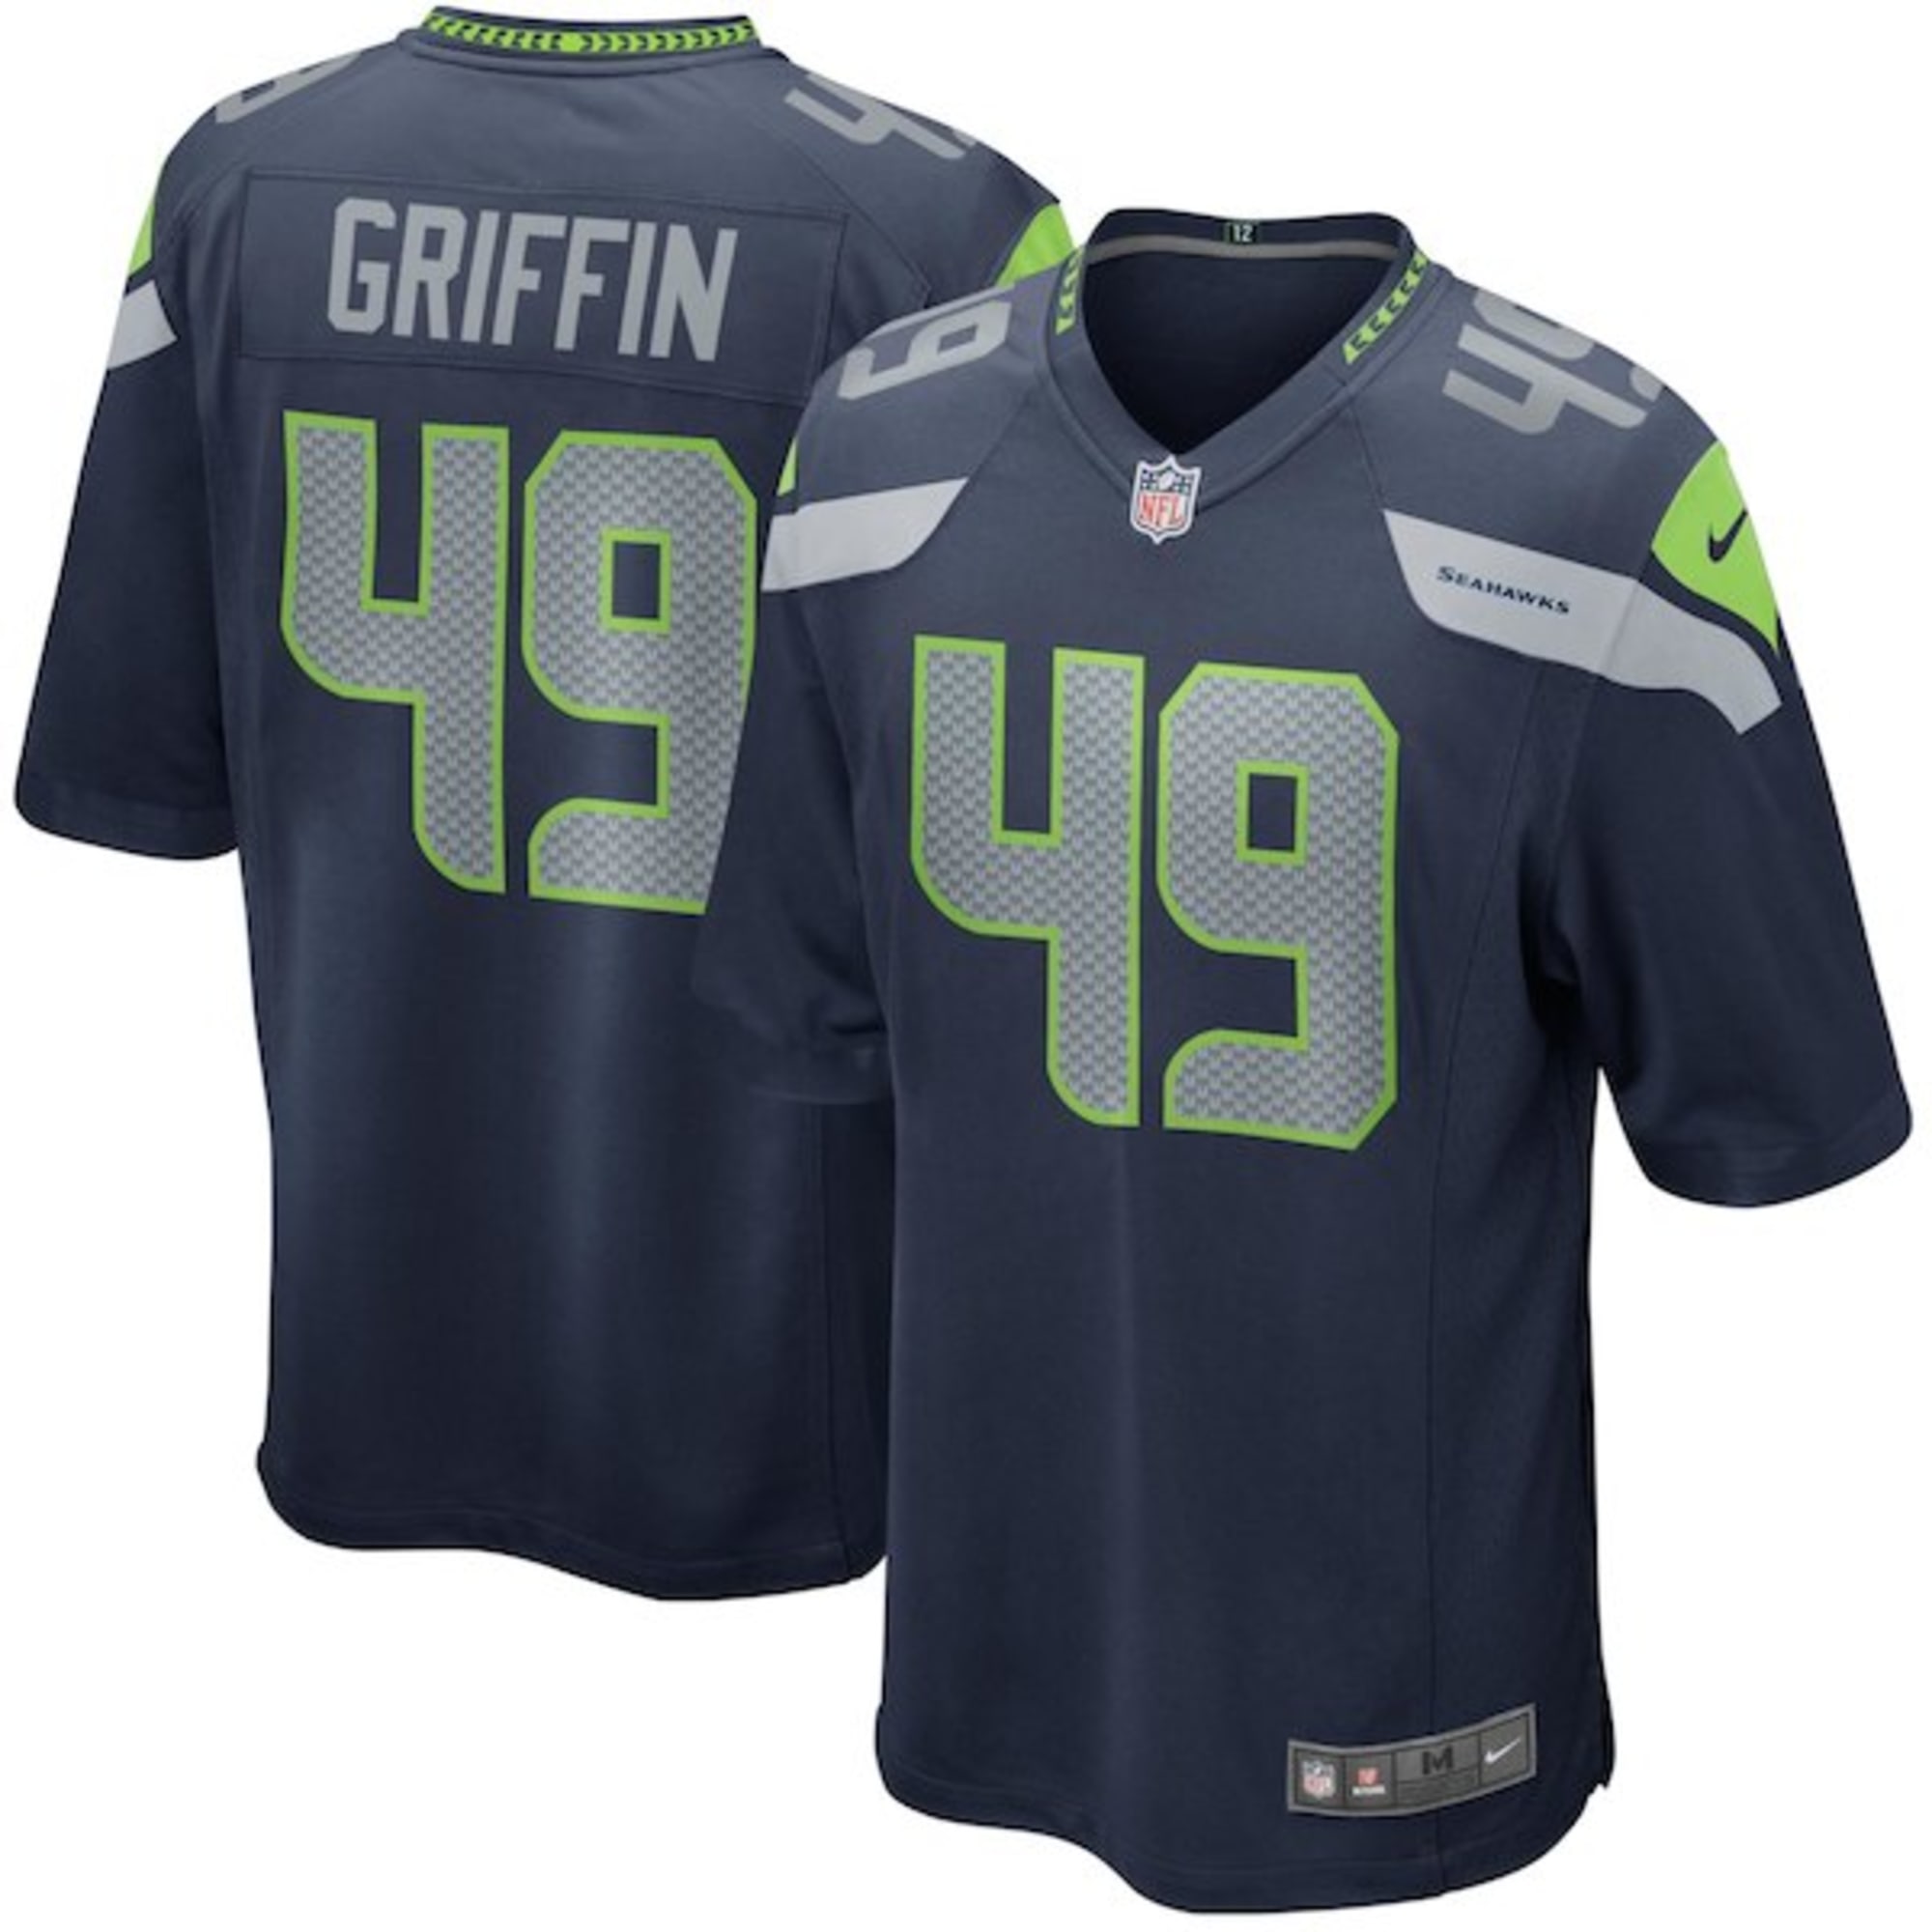 Must-have Seattle Seahawks items for 